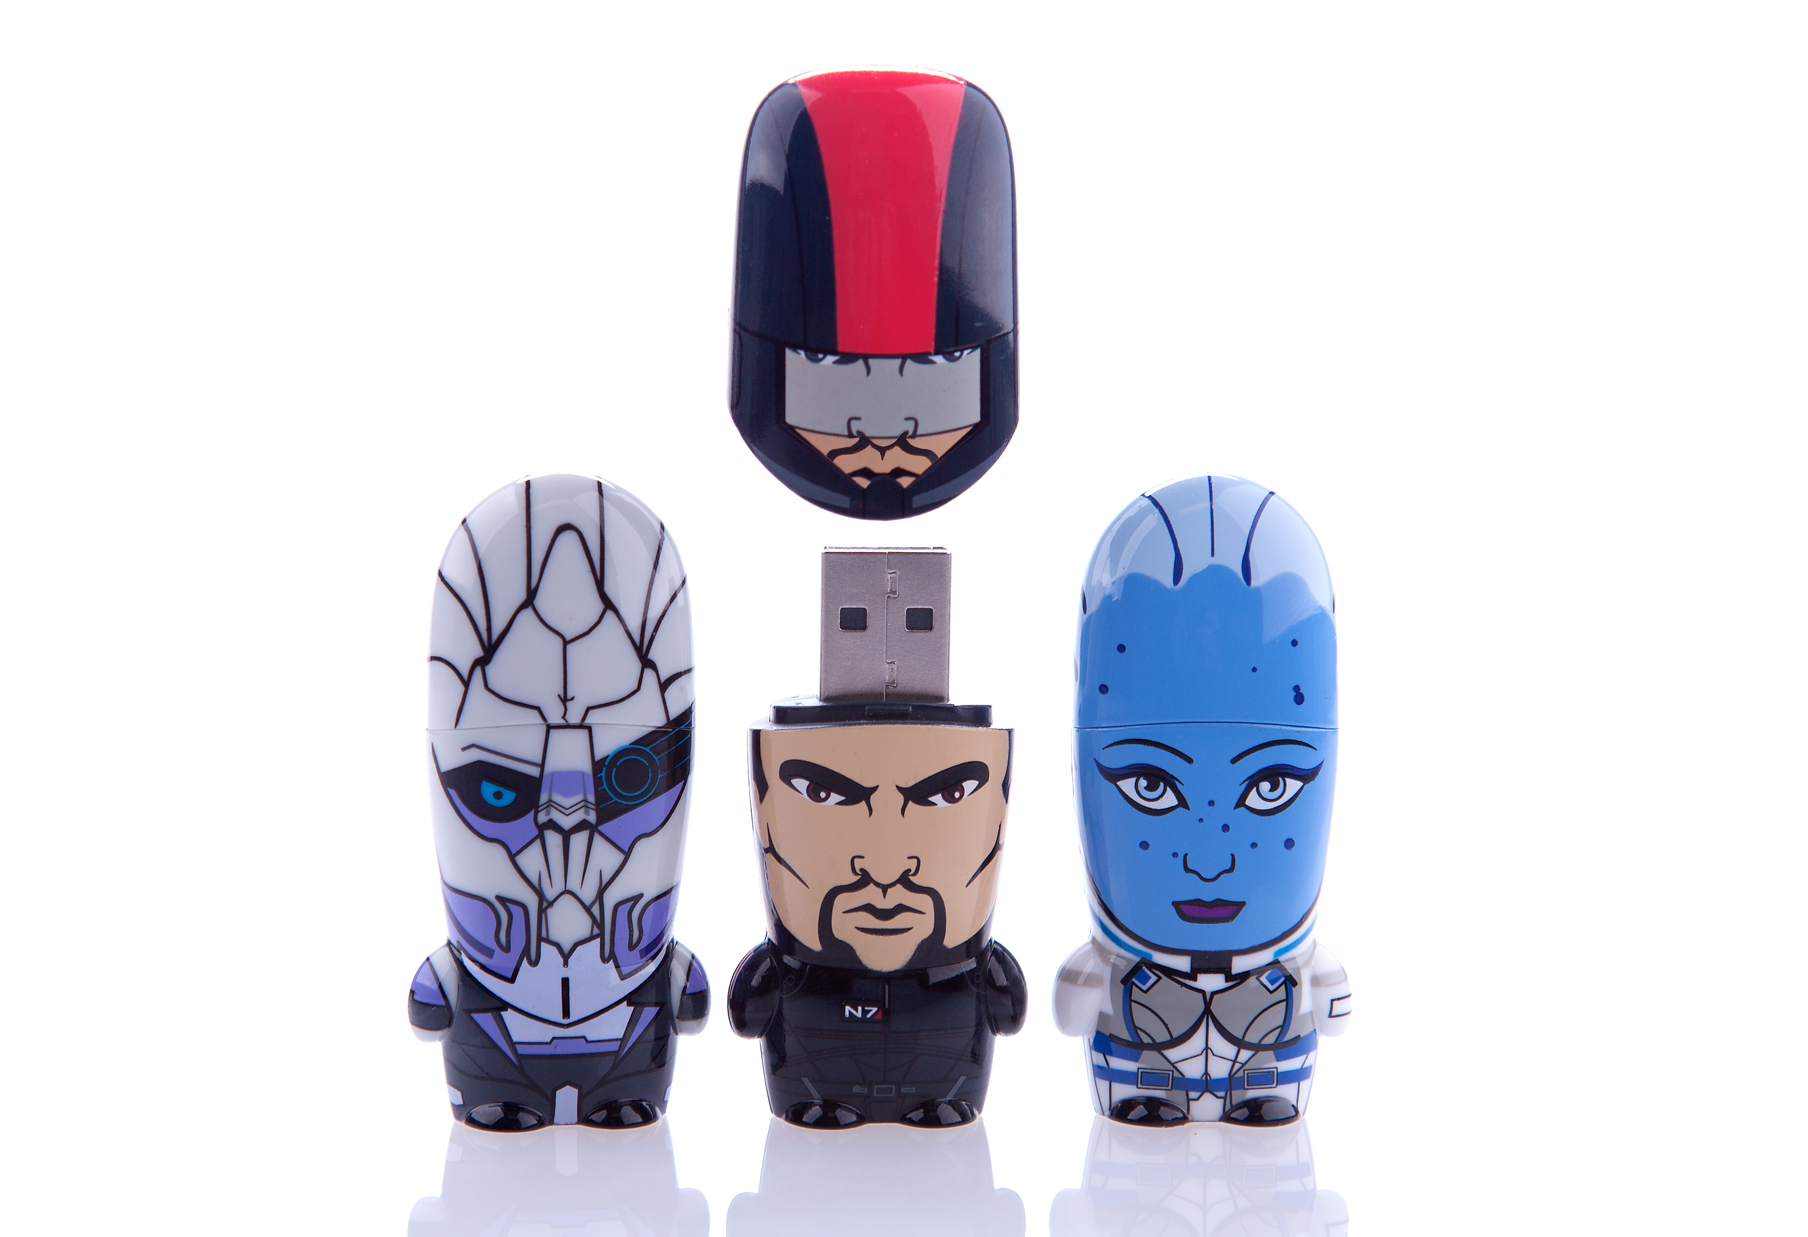 Mass Effect 3 MIMOBOT USB Flash Drive for Mimoco